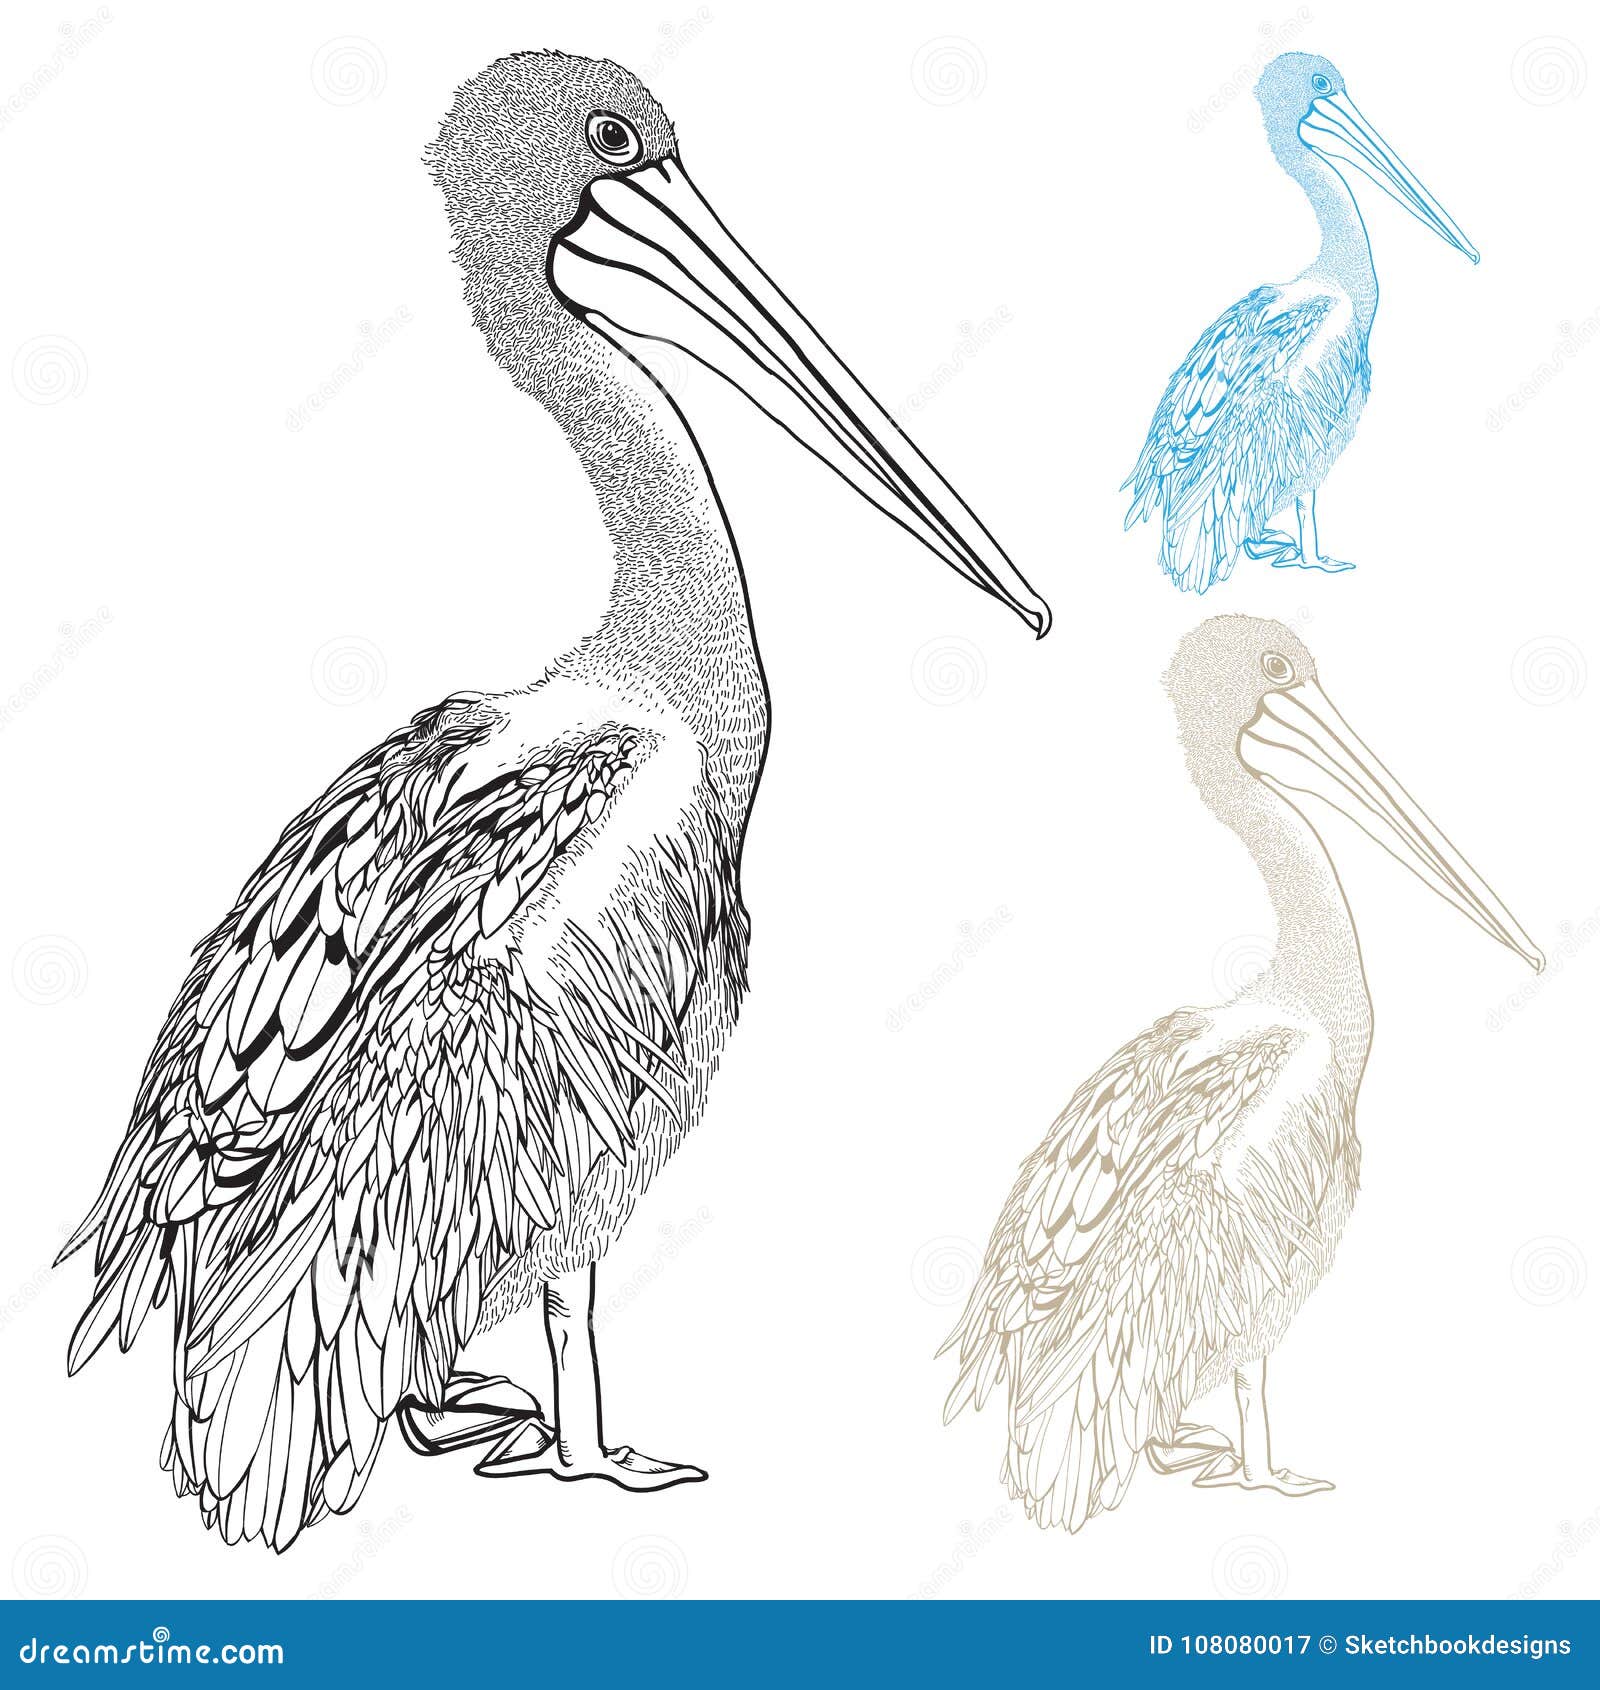 Hand drawn sketch of pelican with spread wings vector illustration  isolated on white with text  CanStock